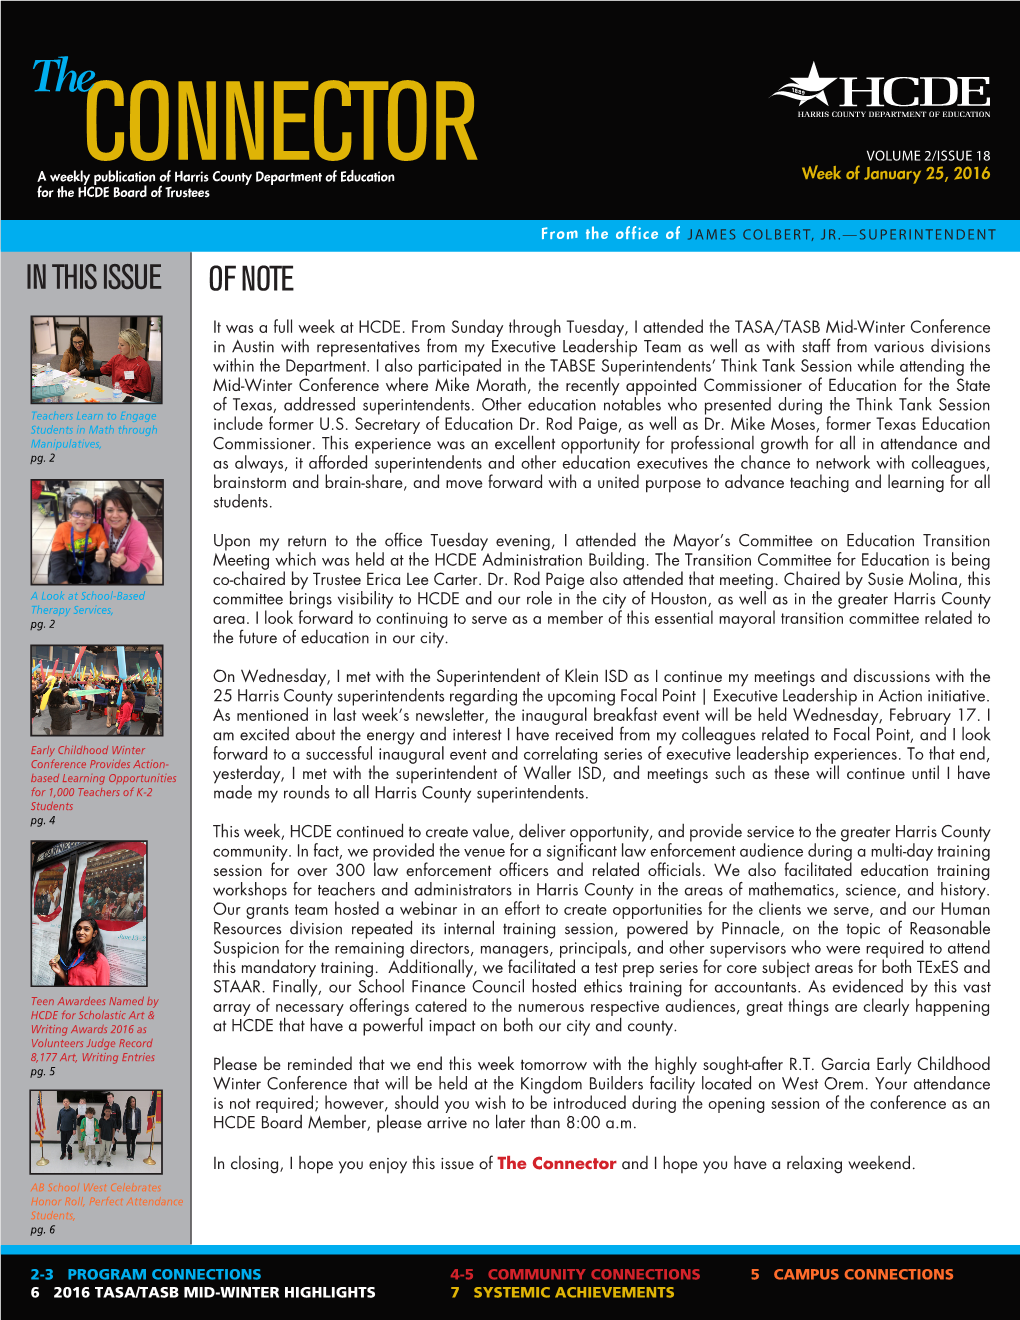 CONNECTOR Publication of Harris County Department of Education Week of January 25, 2016 for the HCDE Board of Trustees